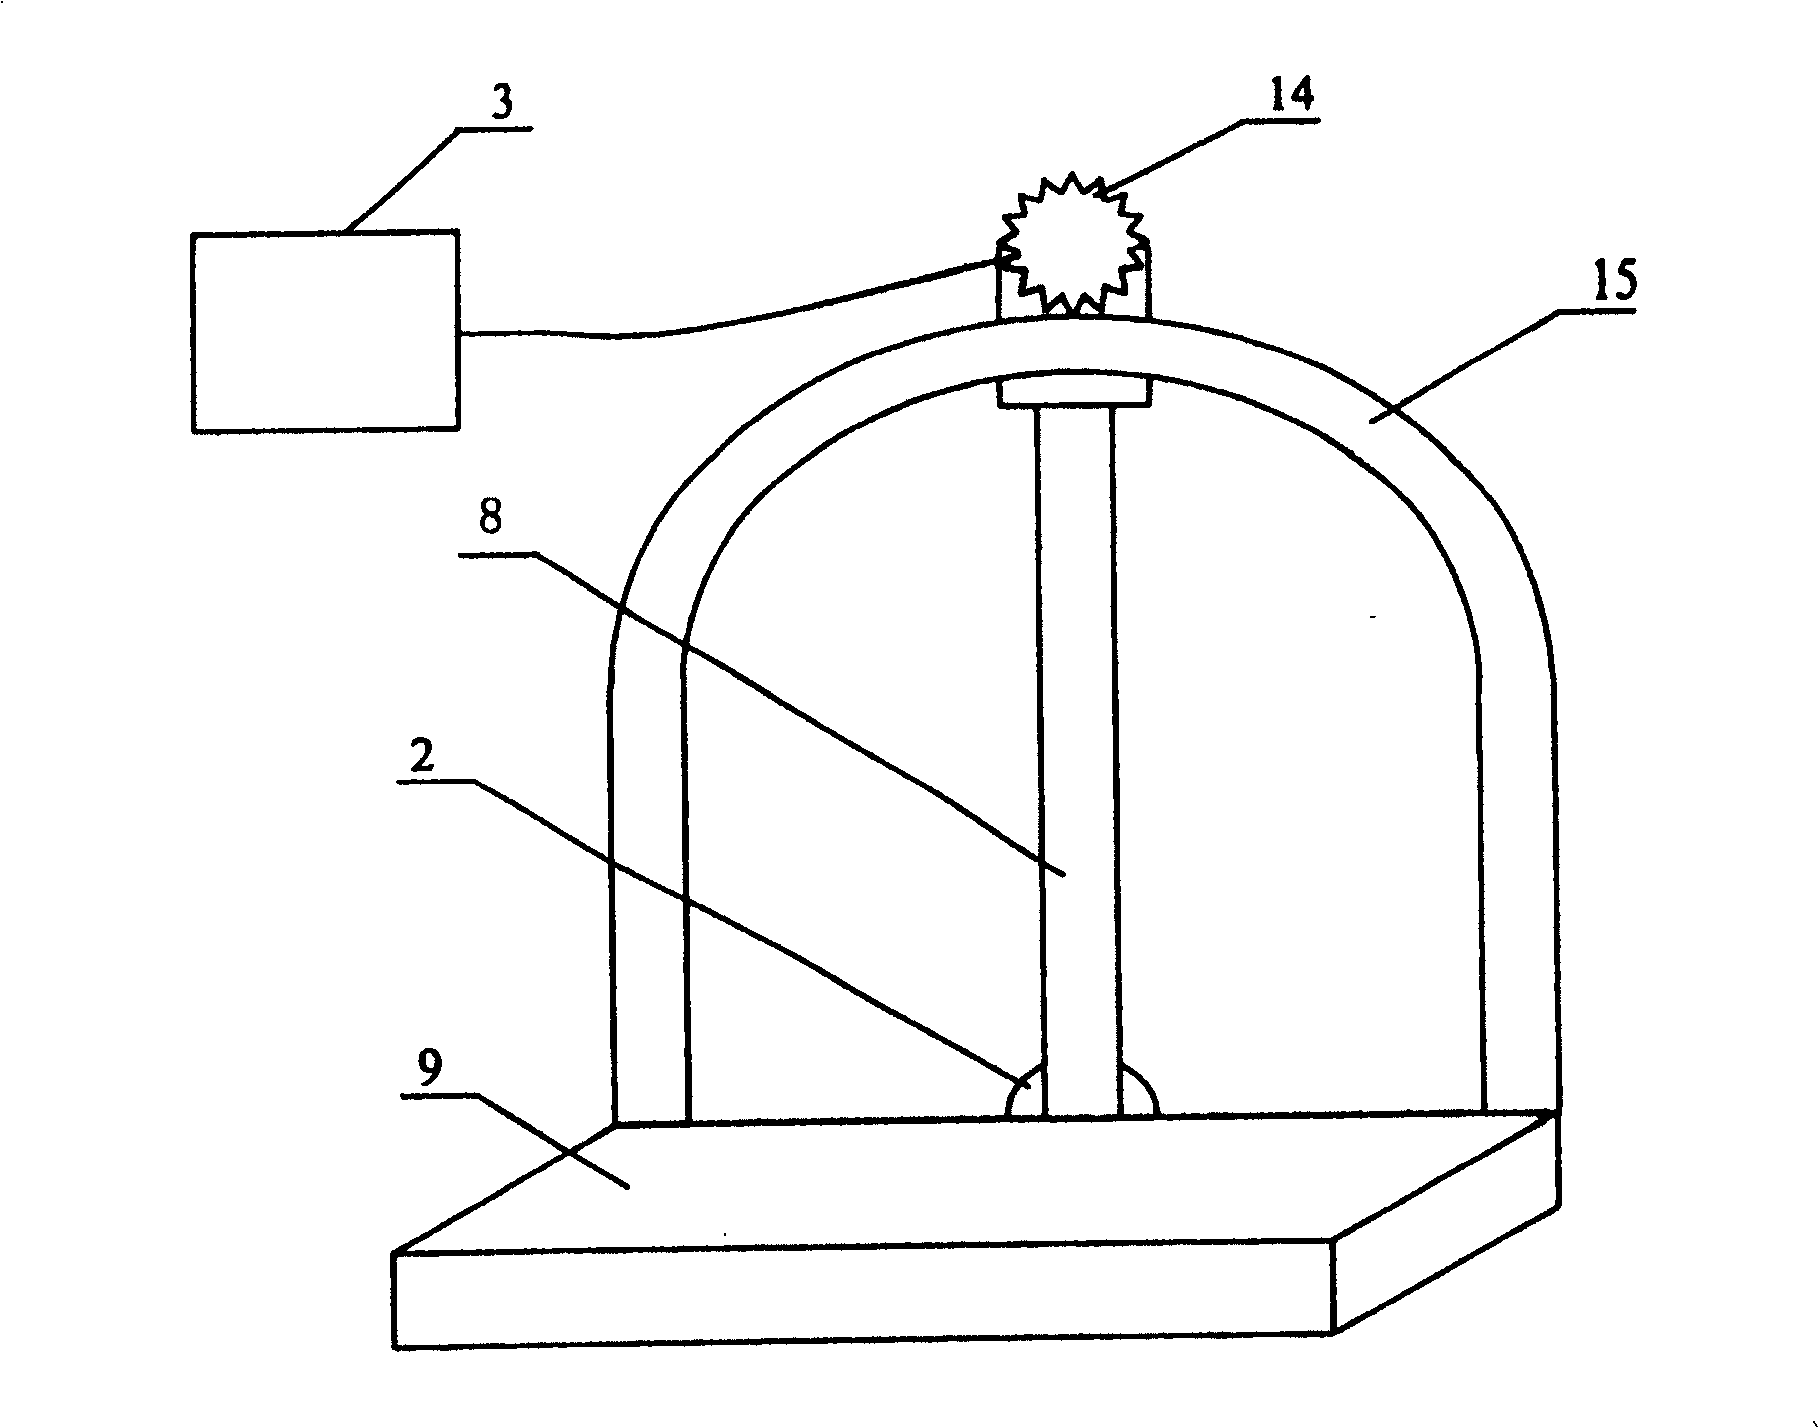 Fluorescent optical imaging device